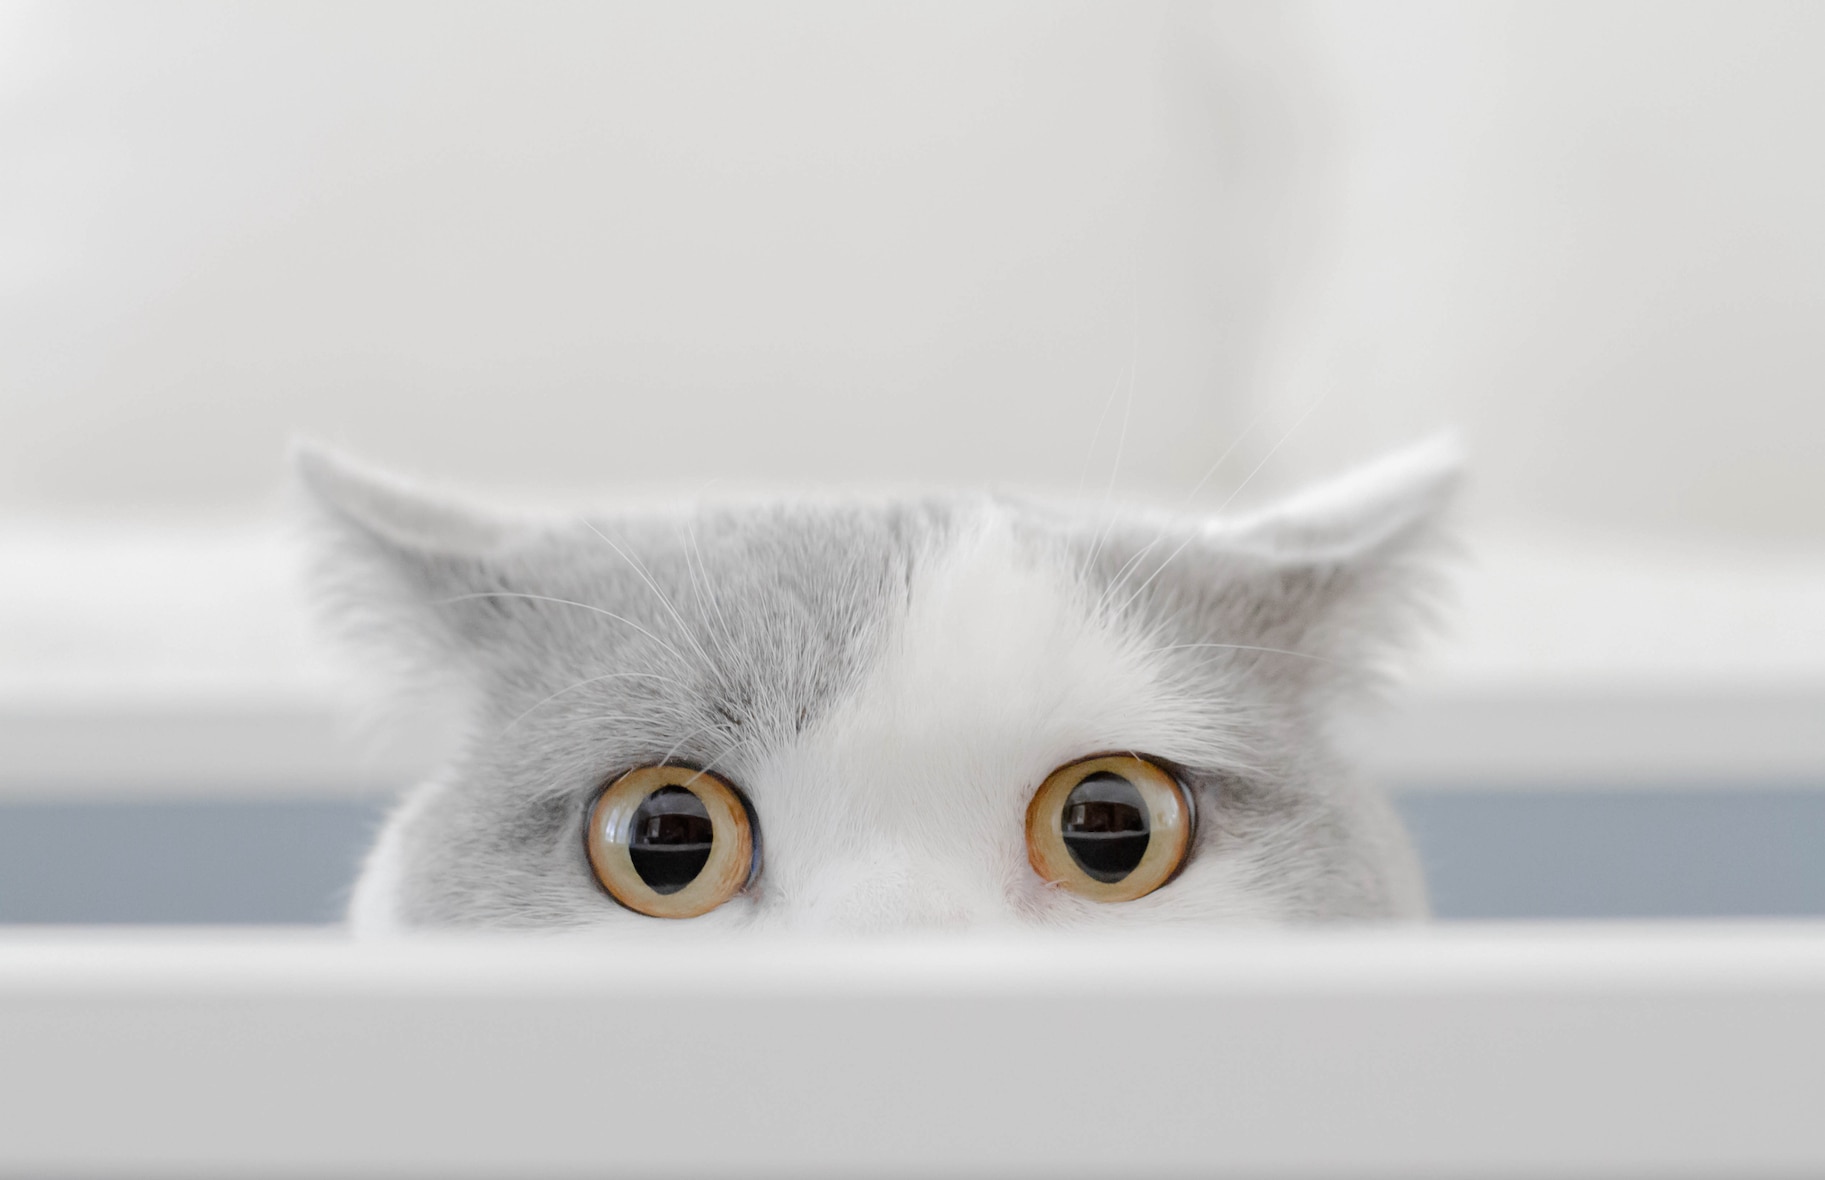 Your cat likely knows when you’re talking to them, they just pretend not to care